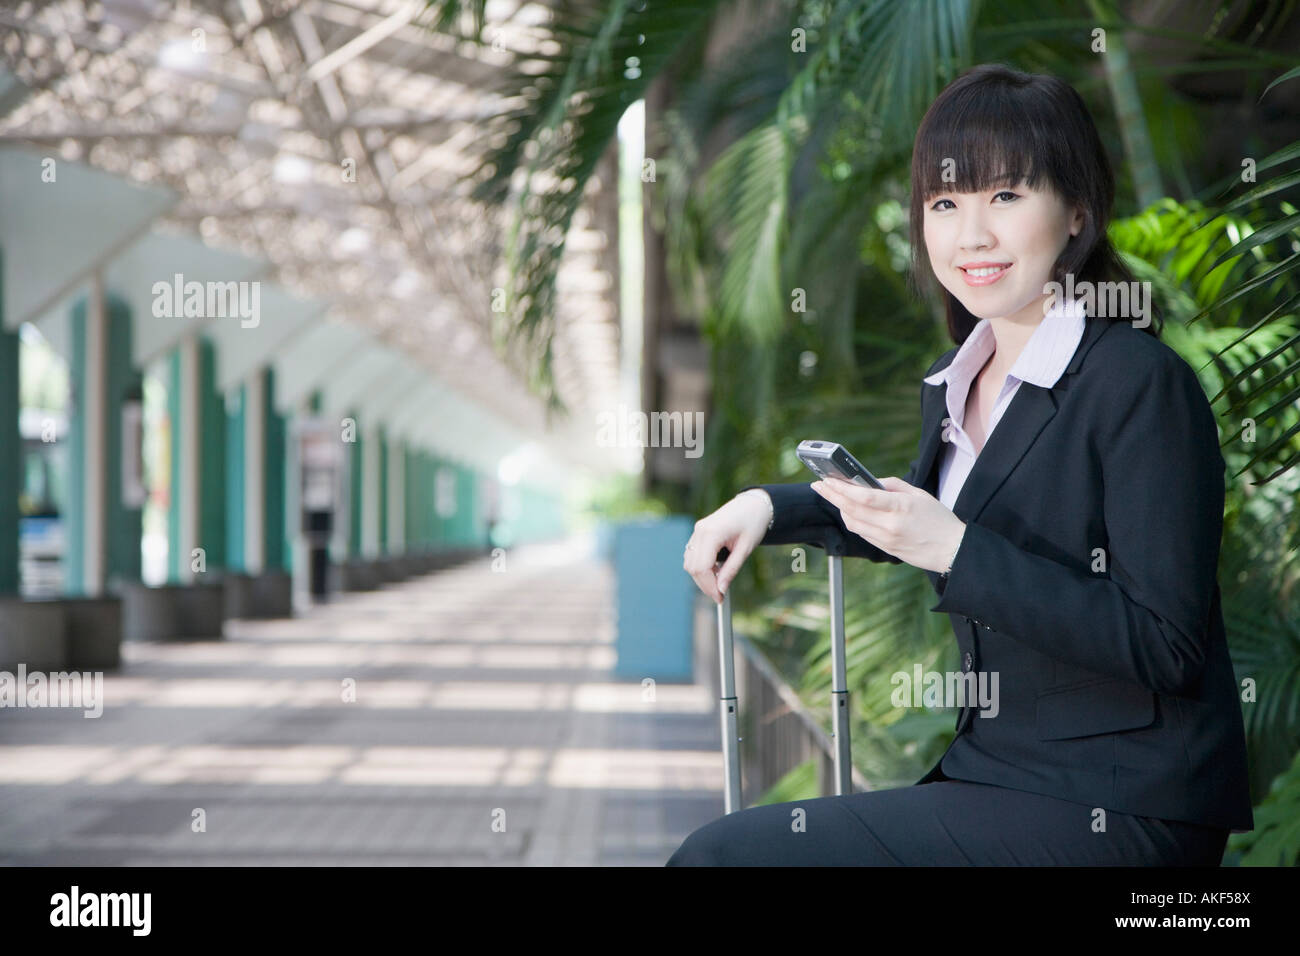 Side profile of a businesswoman and holding a mobile phone Stock Photo